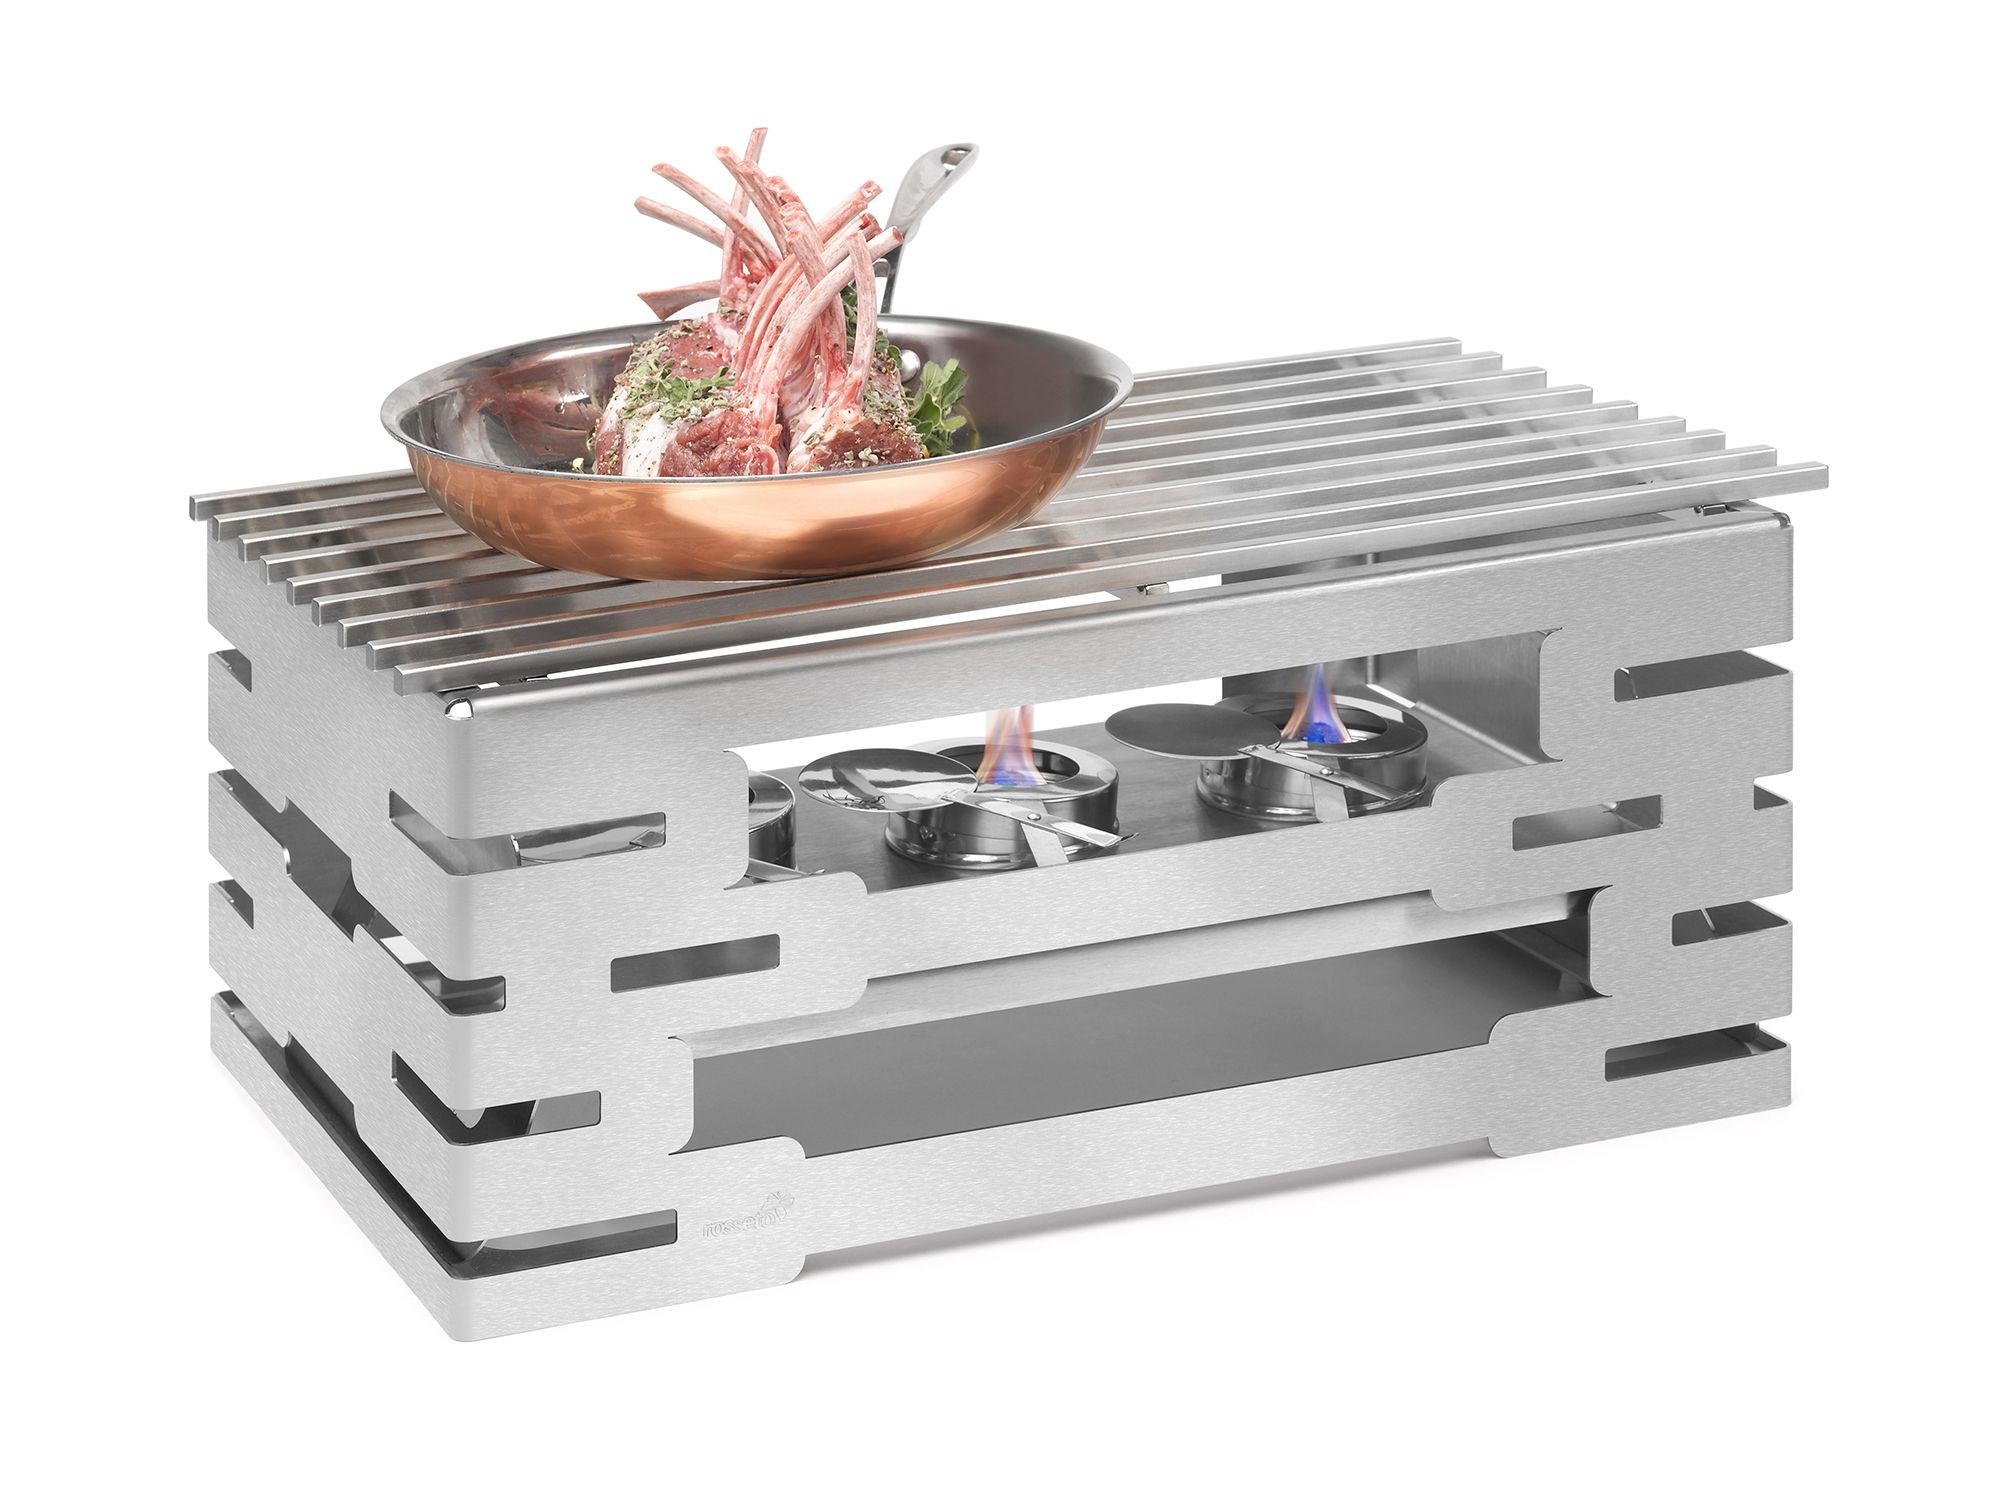 Rosseto SK031 Multi-Chef™ Rectangular Stainless Steel Warmer with Track Grill Top 23.23" x 13.57" x 10.43"